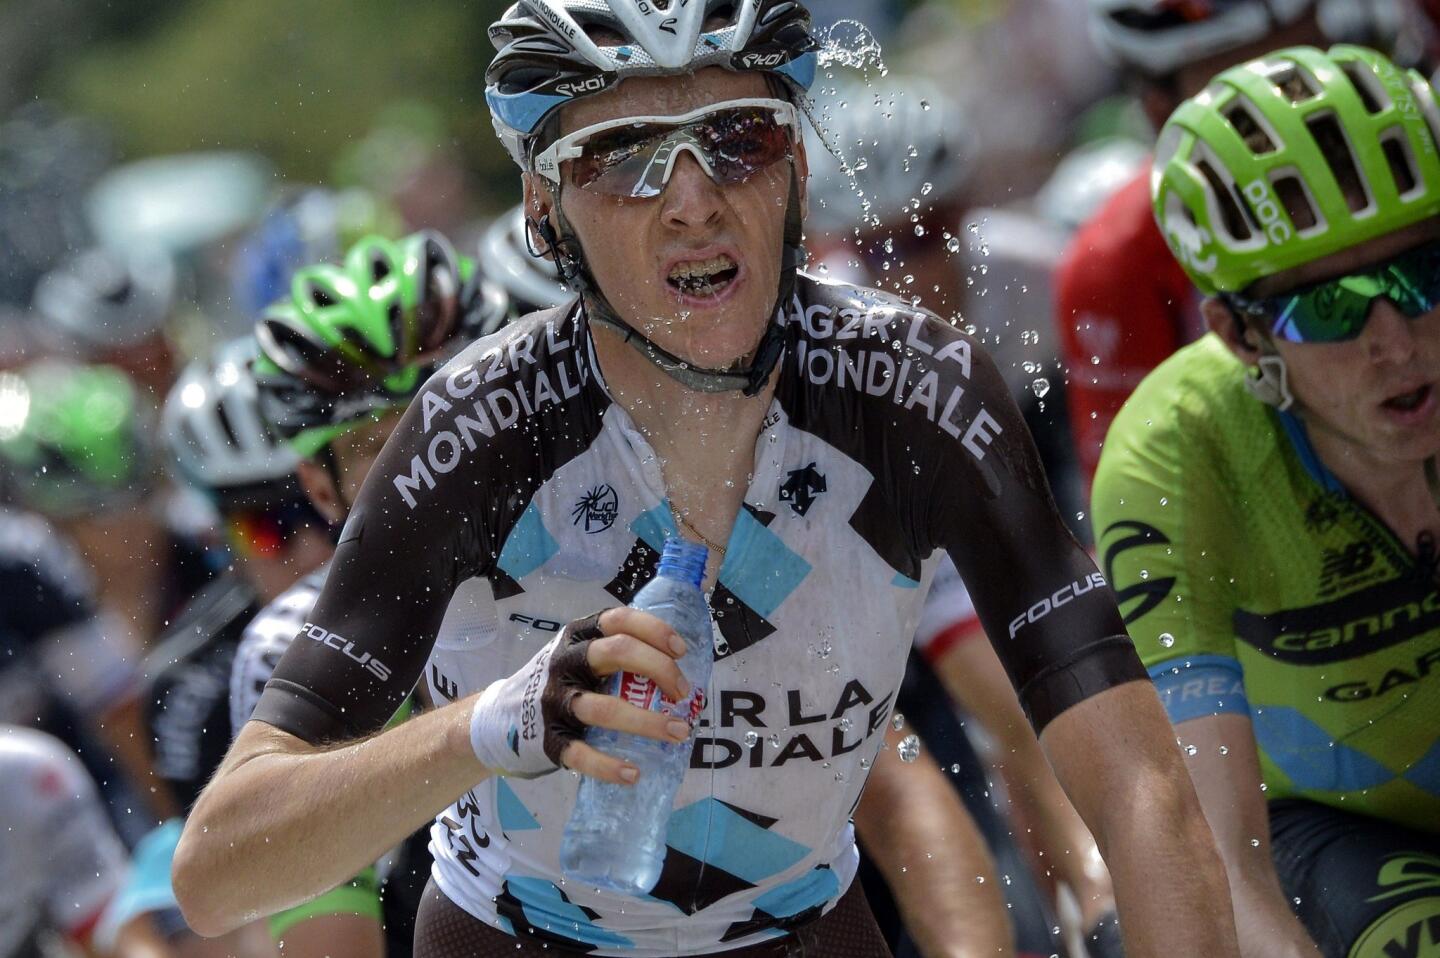 France's Romain Bardet sprays water on his face Thurdsday as he rides to victory in Stage 18 of the Tour de France, between Mende and Valence.